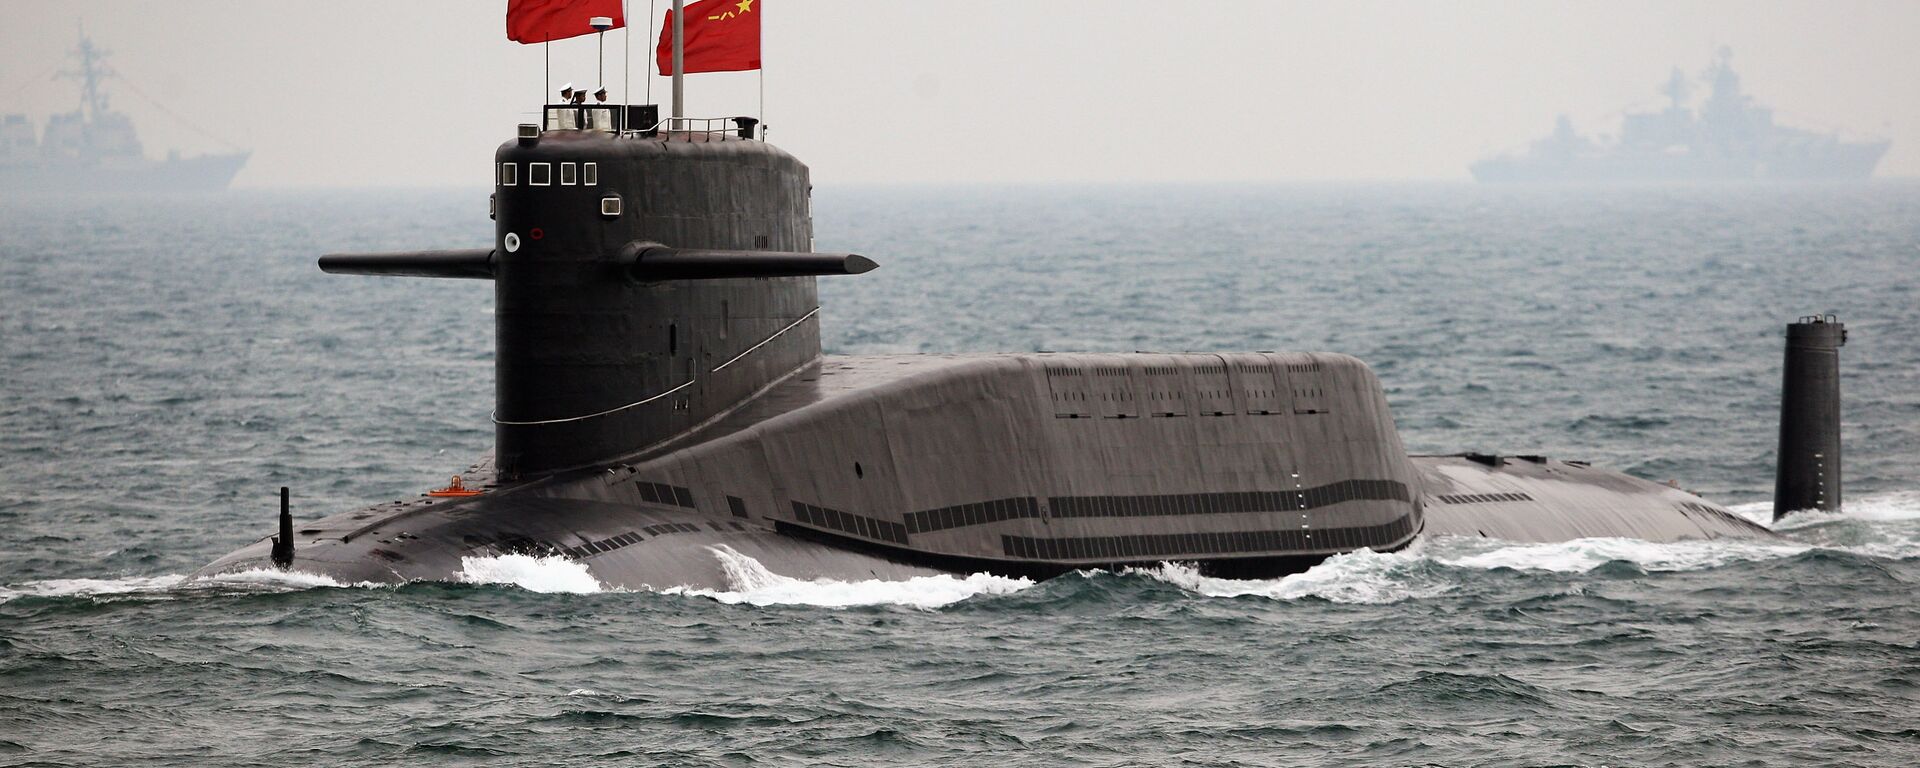 A Chinese Navy submarine attends an international fleet review to celebrate the 60th anniversary of the founding of the People's Liberation Army Navy on April 23, 2009 off Qingdao in Shandong Province - Sputnik International, 1920, 02.12.2016